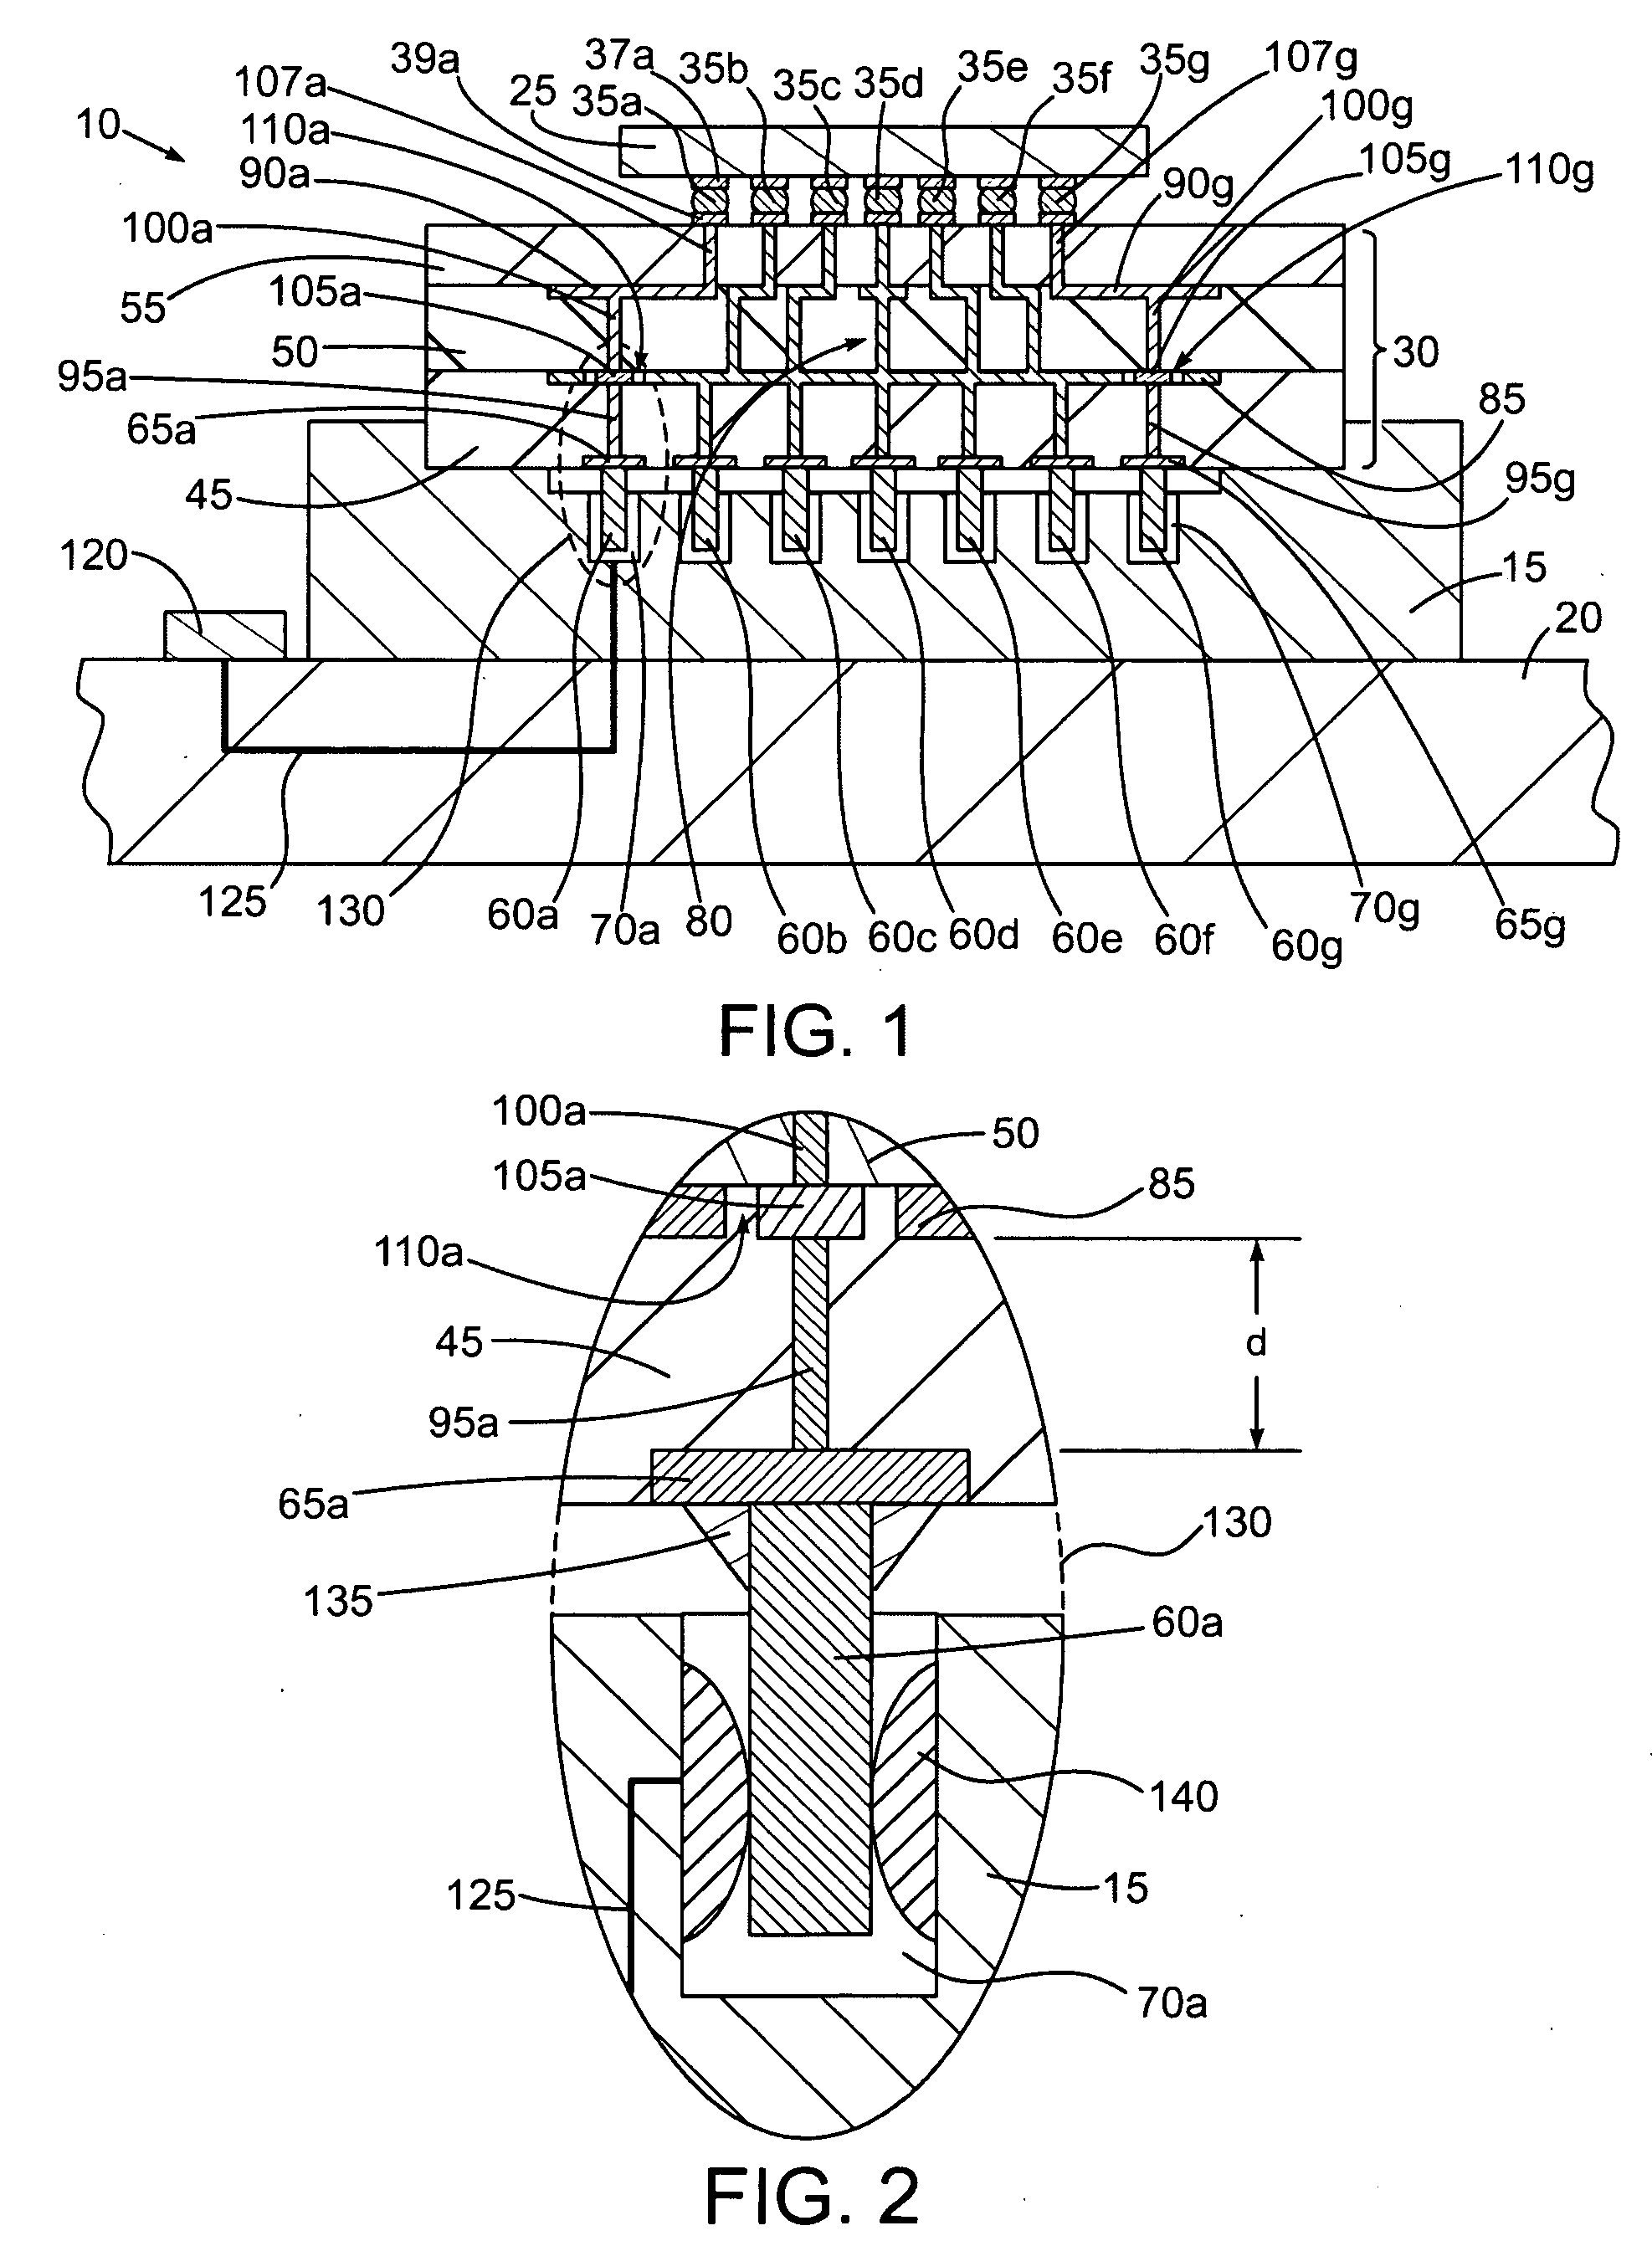 Package Level Tuning Techniques for Propagation Channels of High-Speed Signals